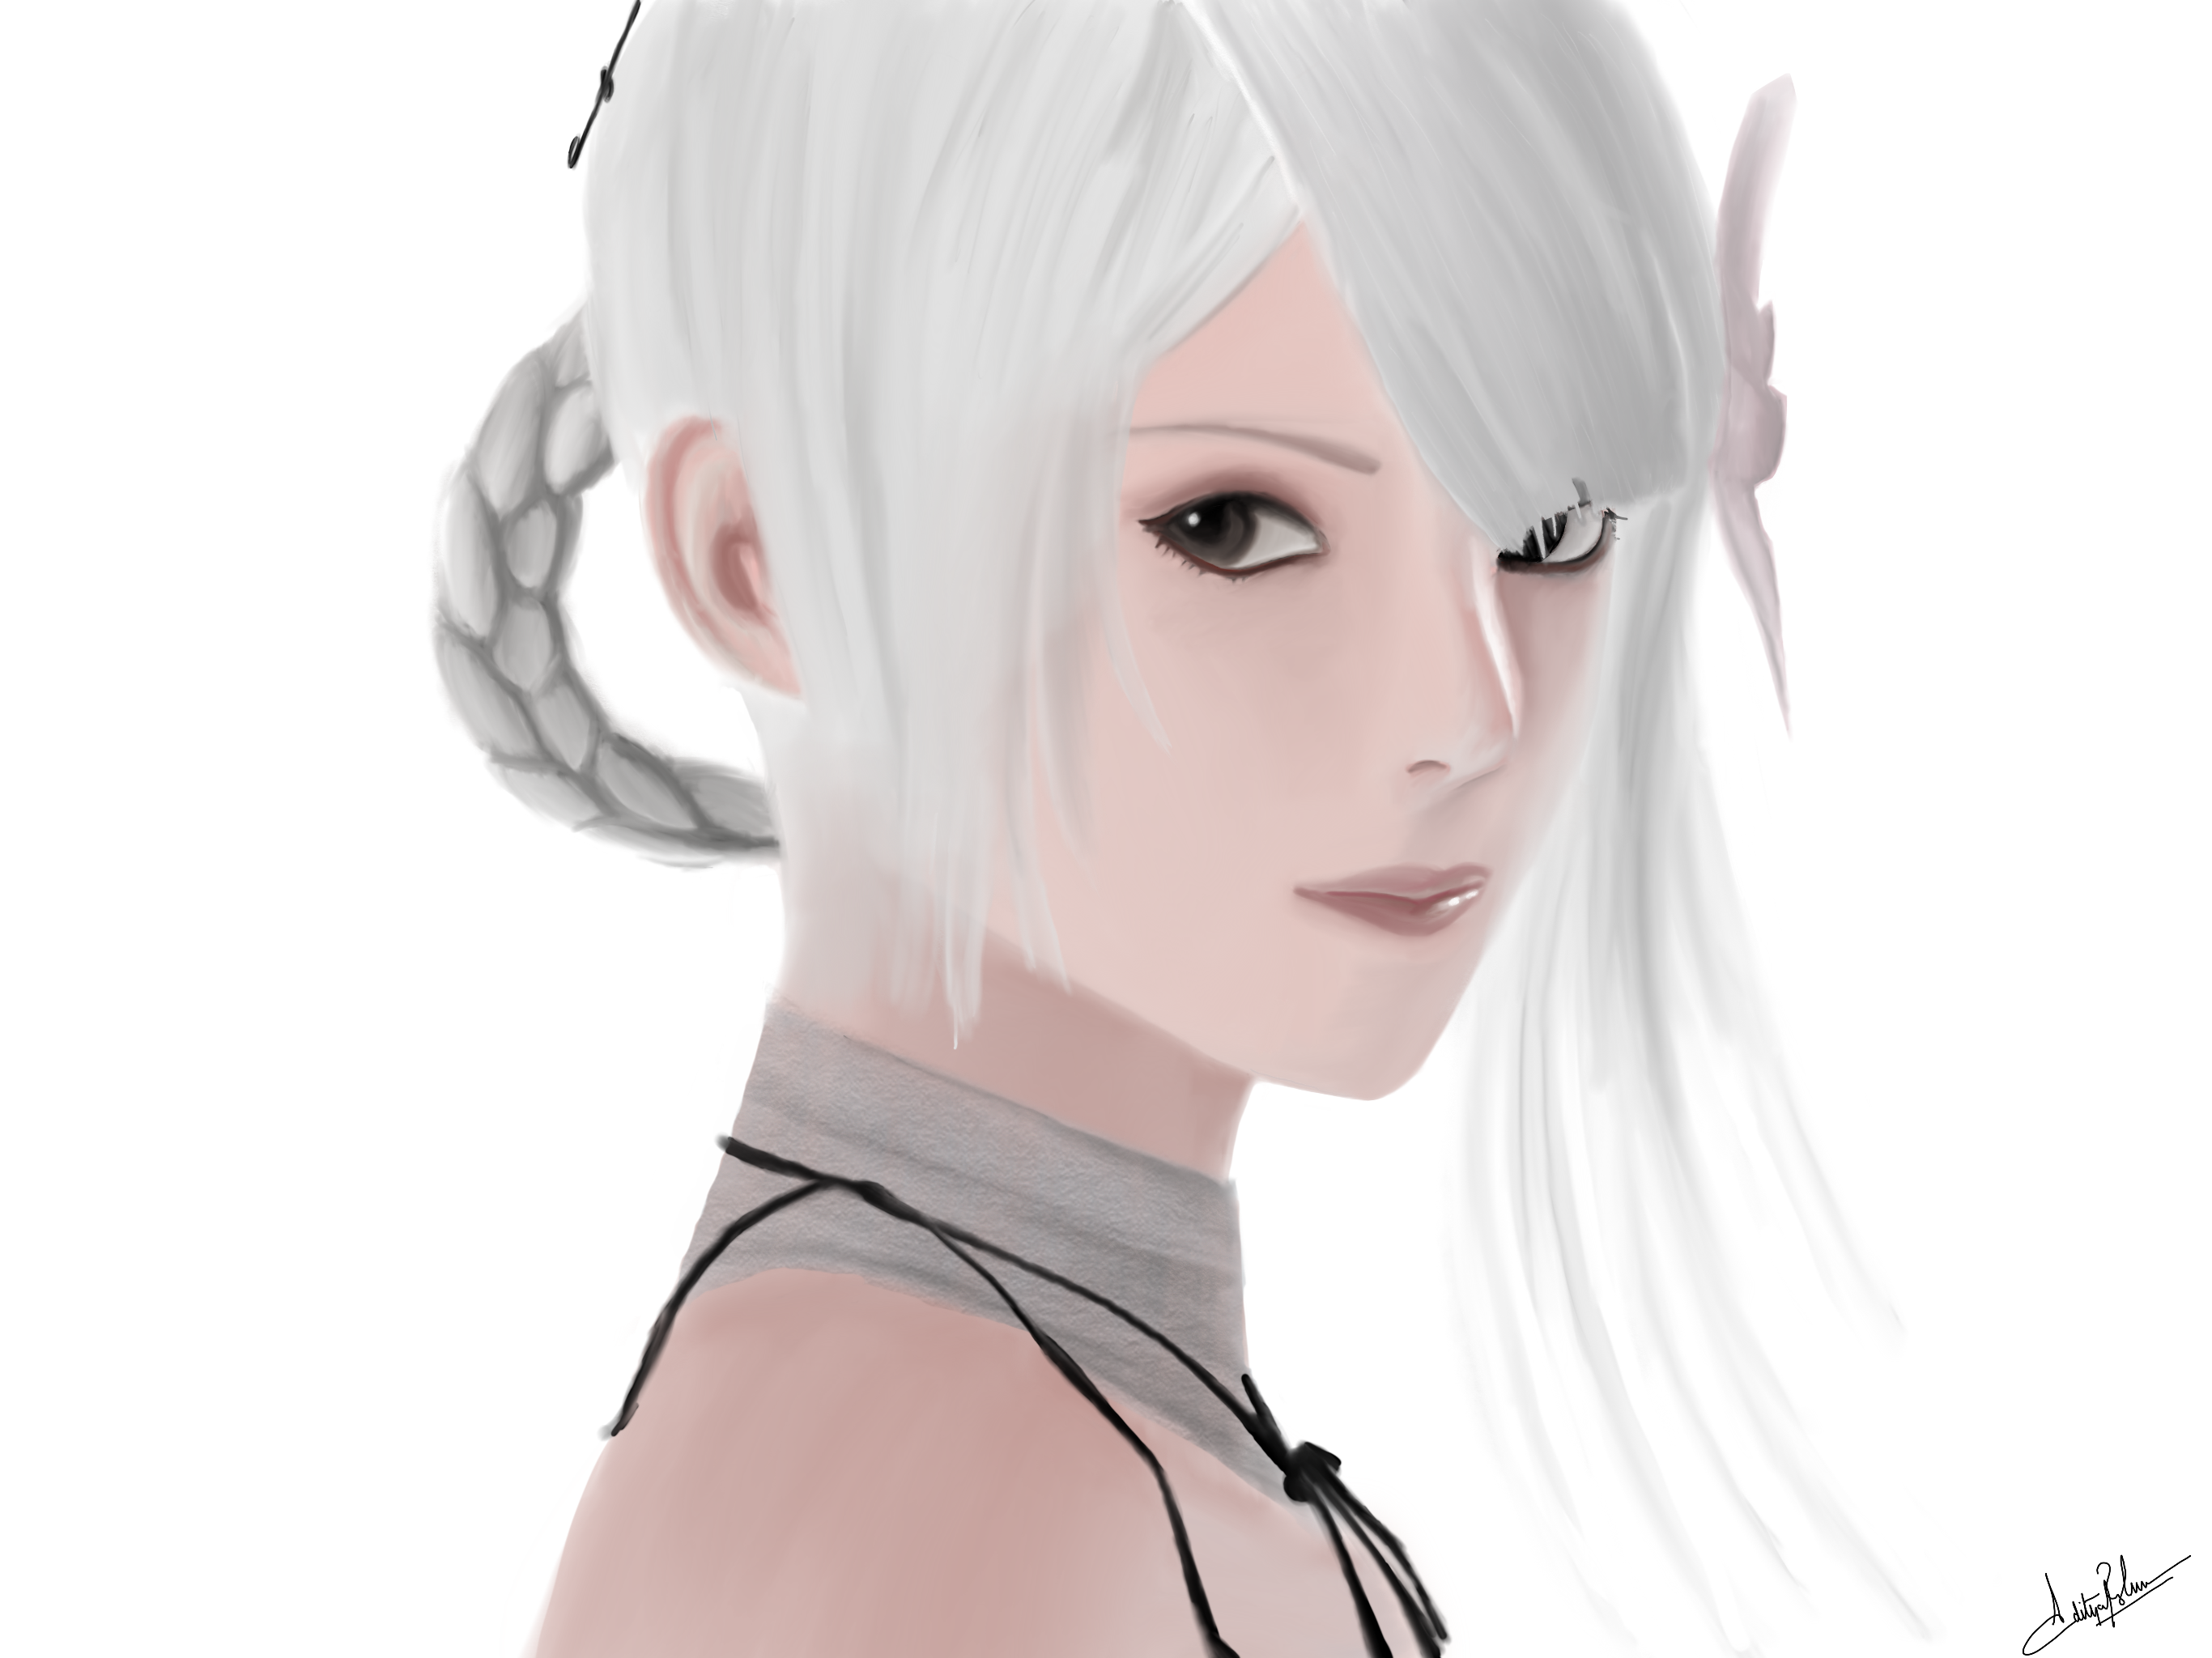 **Kaine** from *NieR Replicant ver.1.22474487139...*